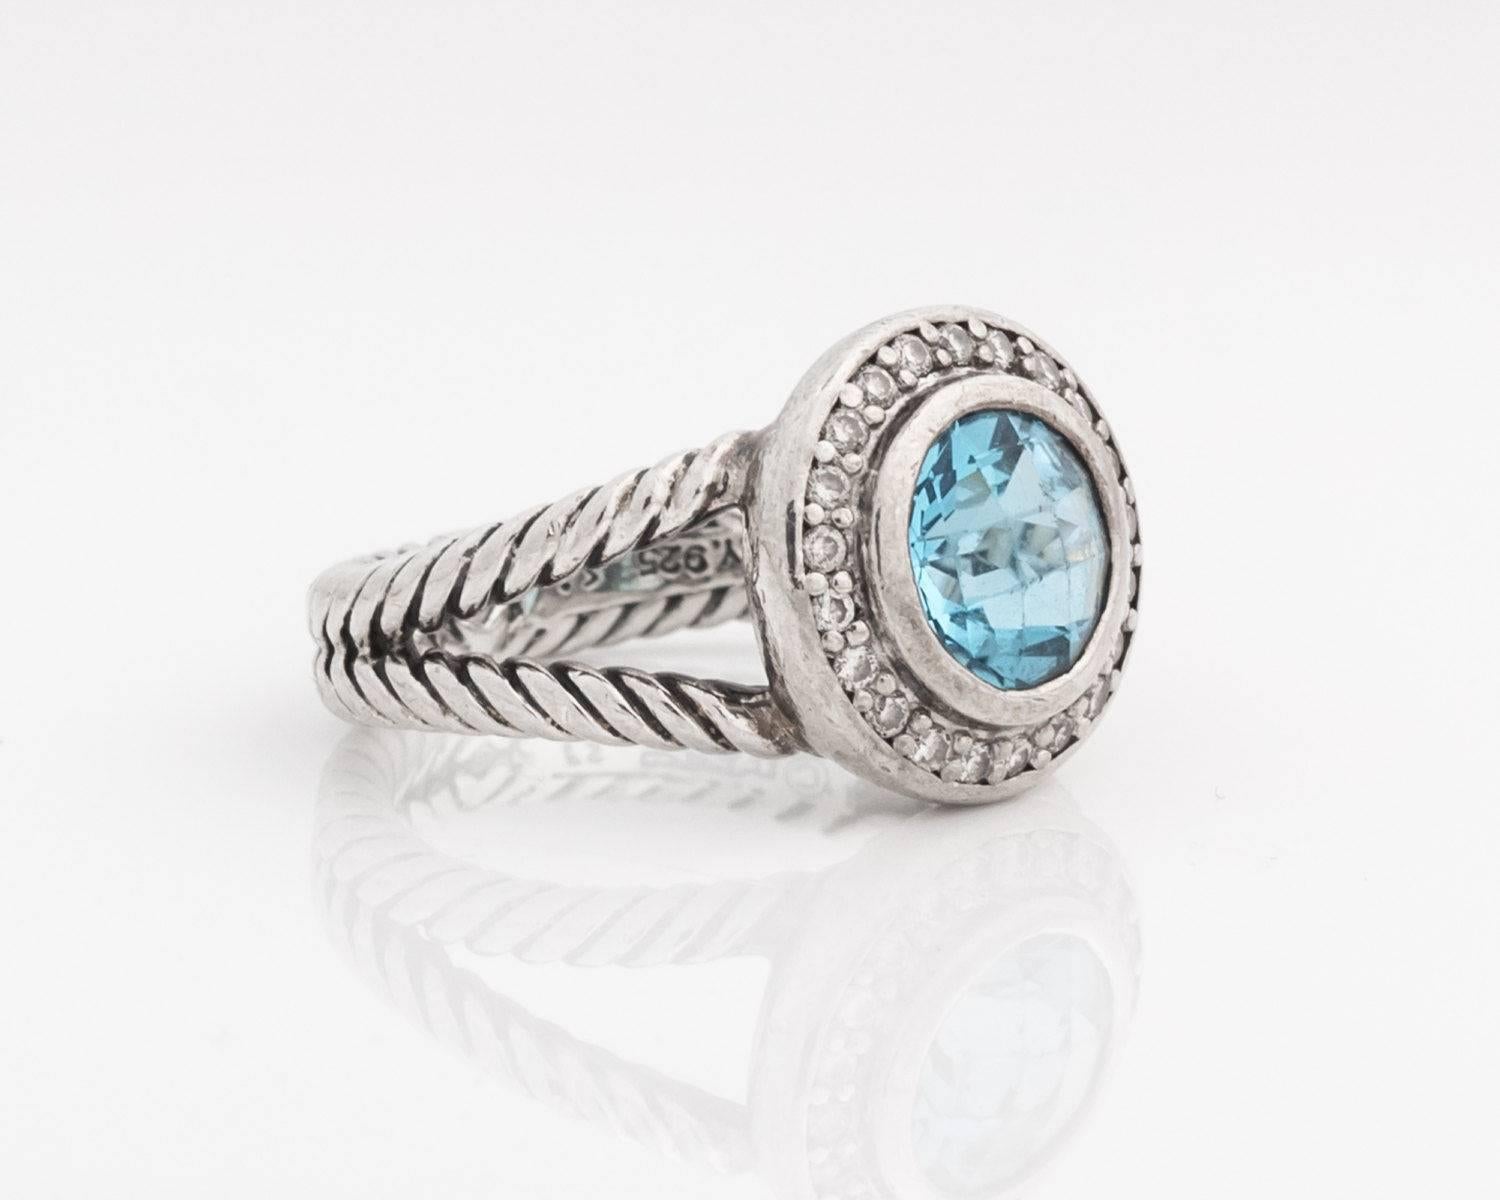 1983 David Yurman Cerise Collection Ring - Sterling Silver, Diamonds, Blue Topaz

This Gorgeous ring features a beautiful round Sky Blue Topaz surrounded by a glittering Diamond Halo. There are 21 diamonds total. All of the gems are bezel set. The